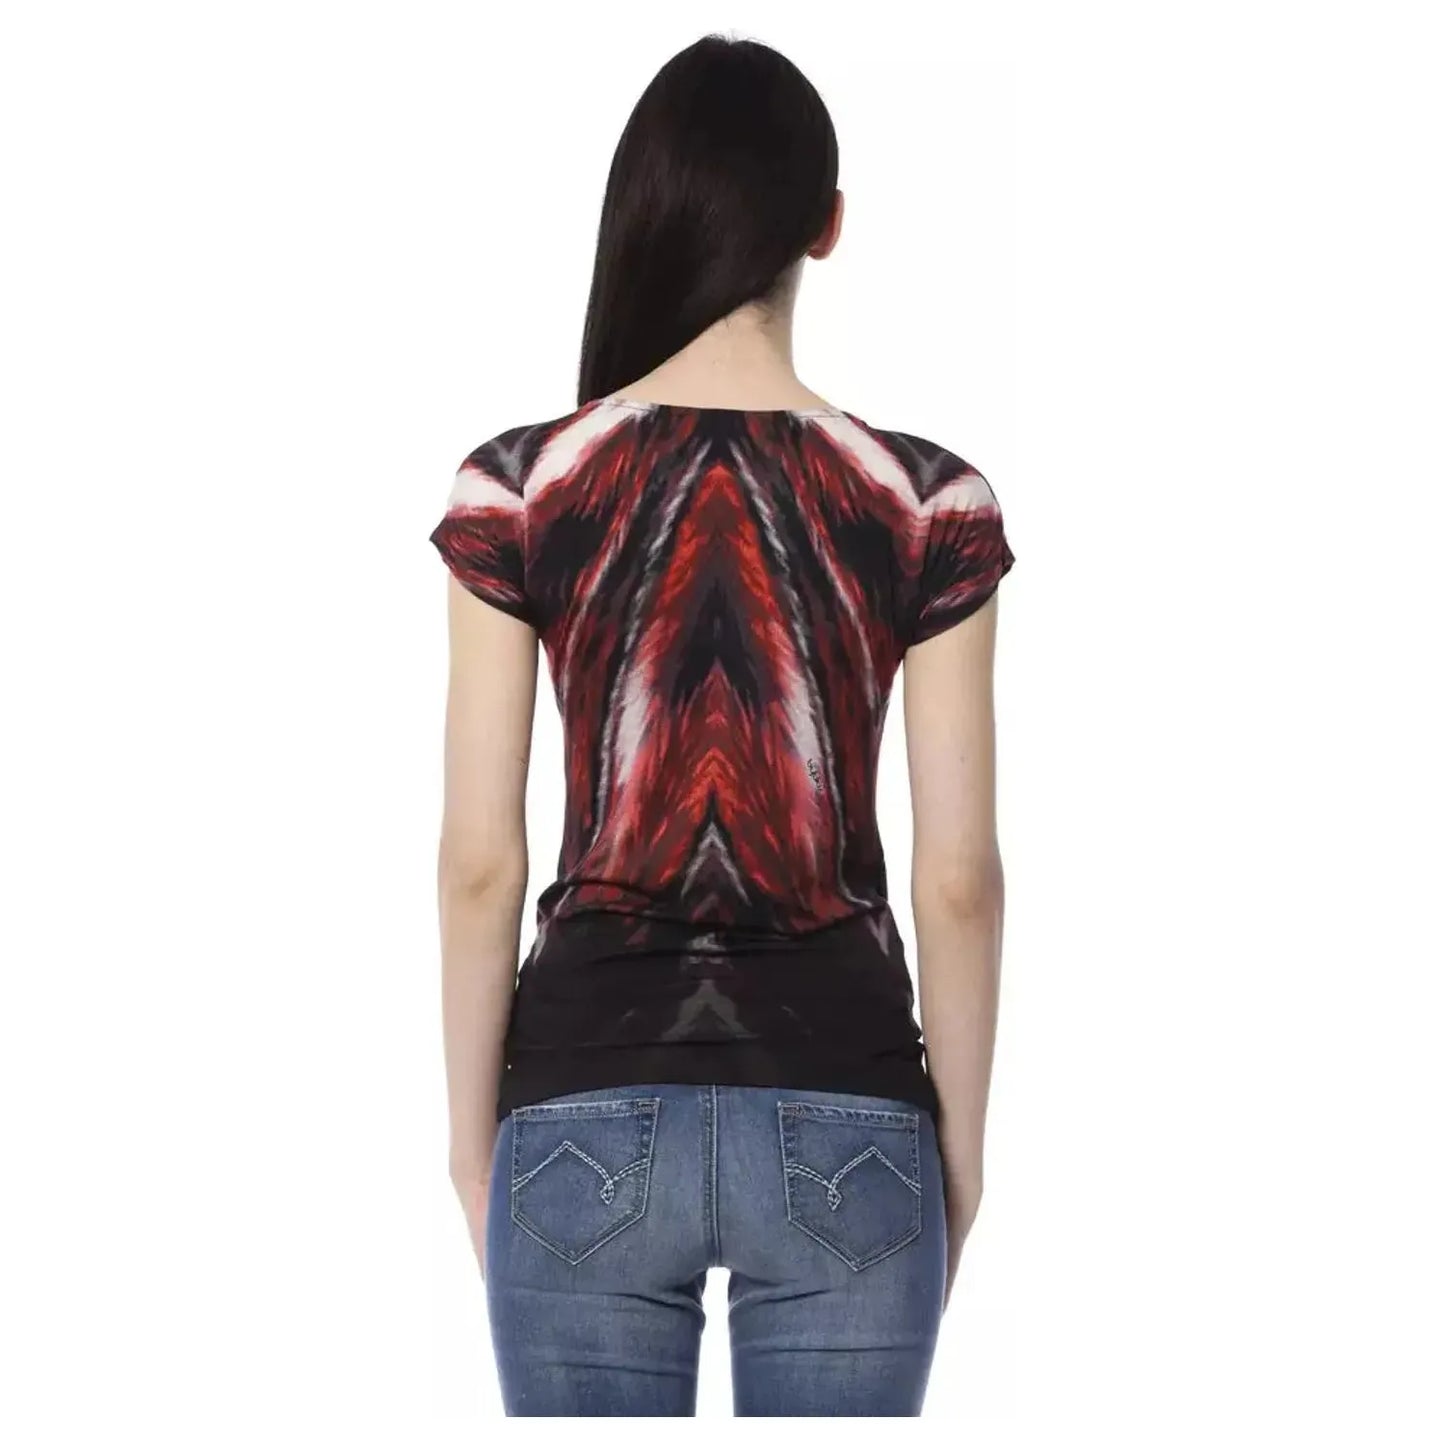 BYBLOS Chic Multicolor Printed Round Neck Tee tops-t-shirt